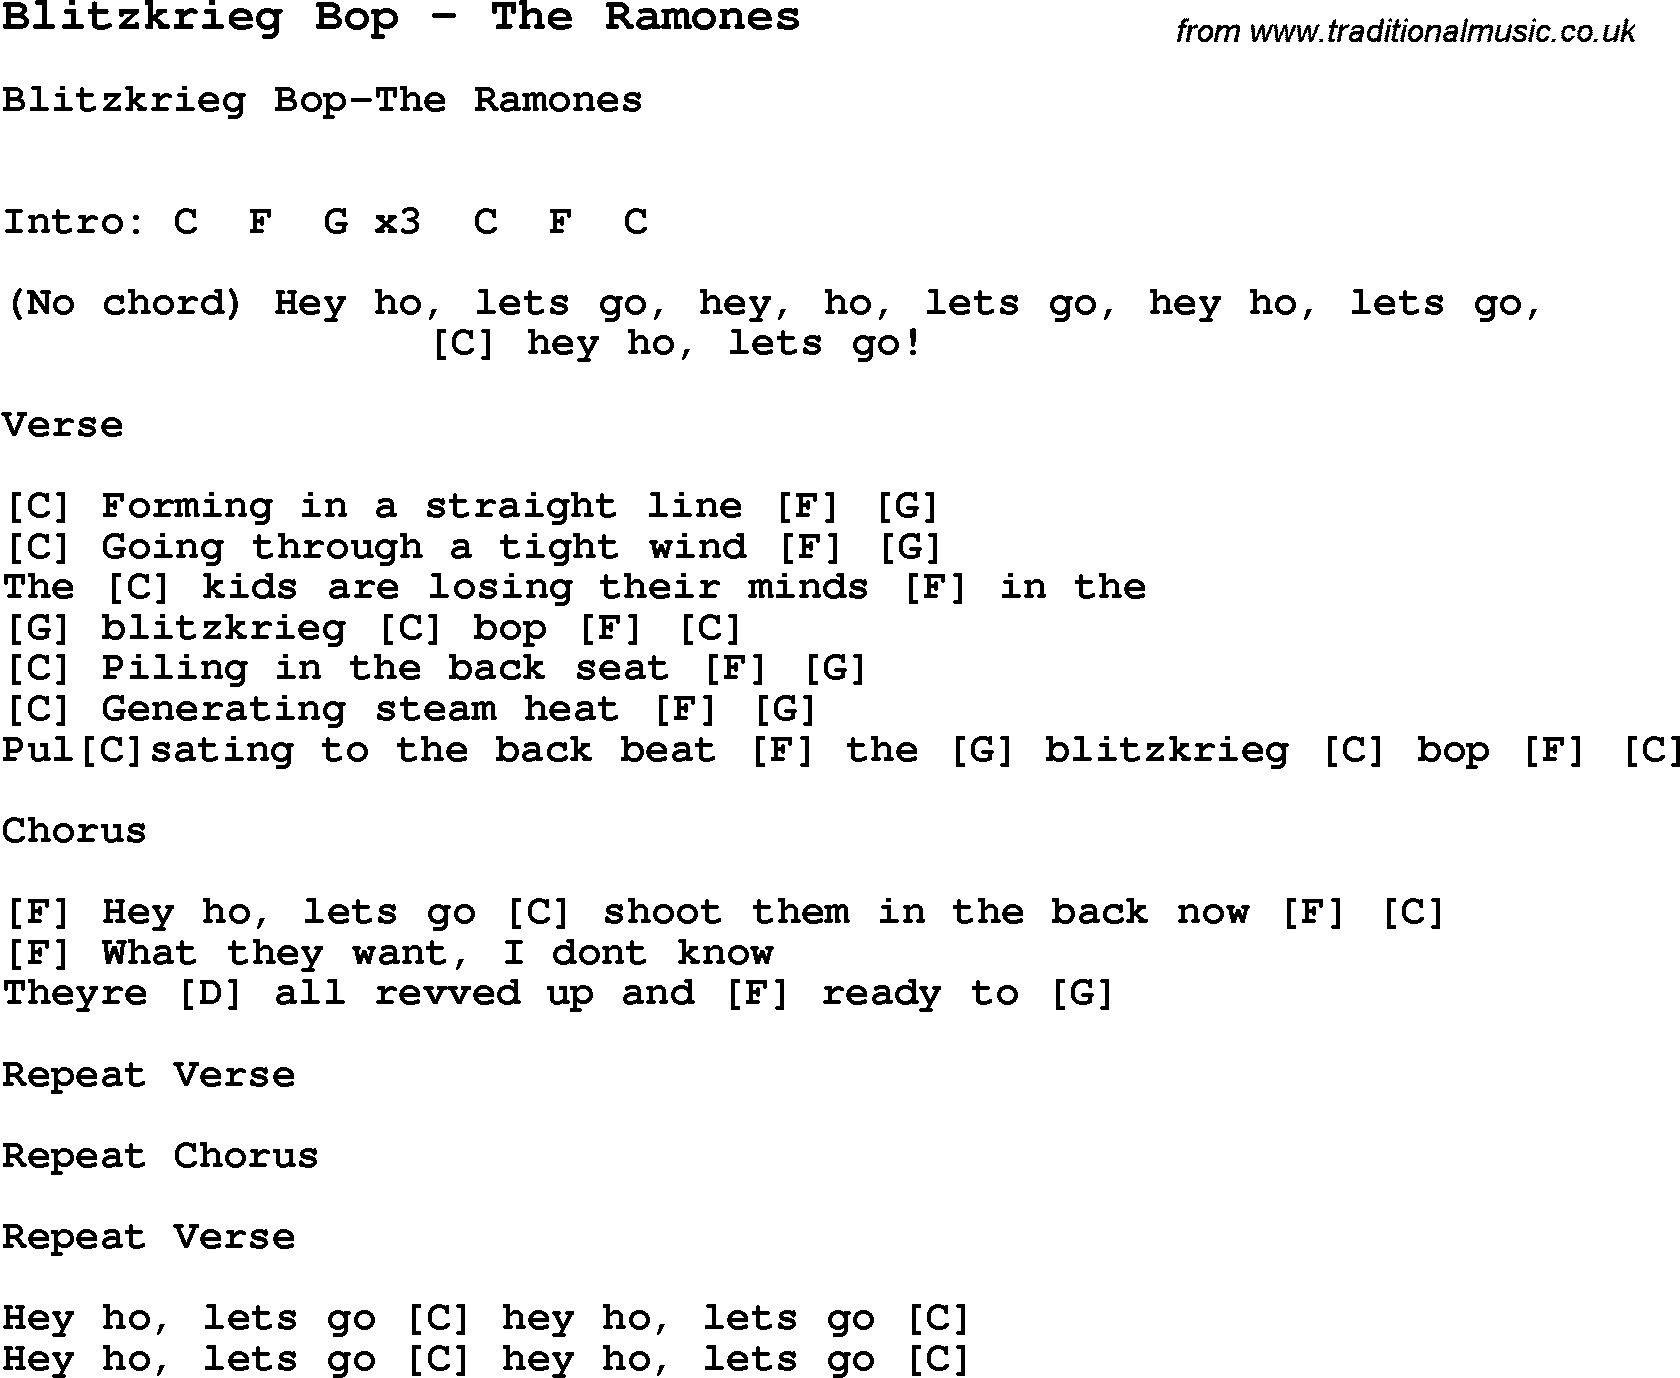 Song Blitzkrieg Bop by The Ramones, with lyrics for vocal performance and accompaniment chords for Ukulele, Guitar Banjo etc.